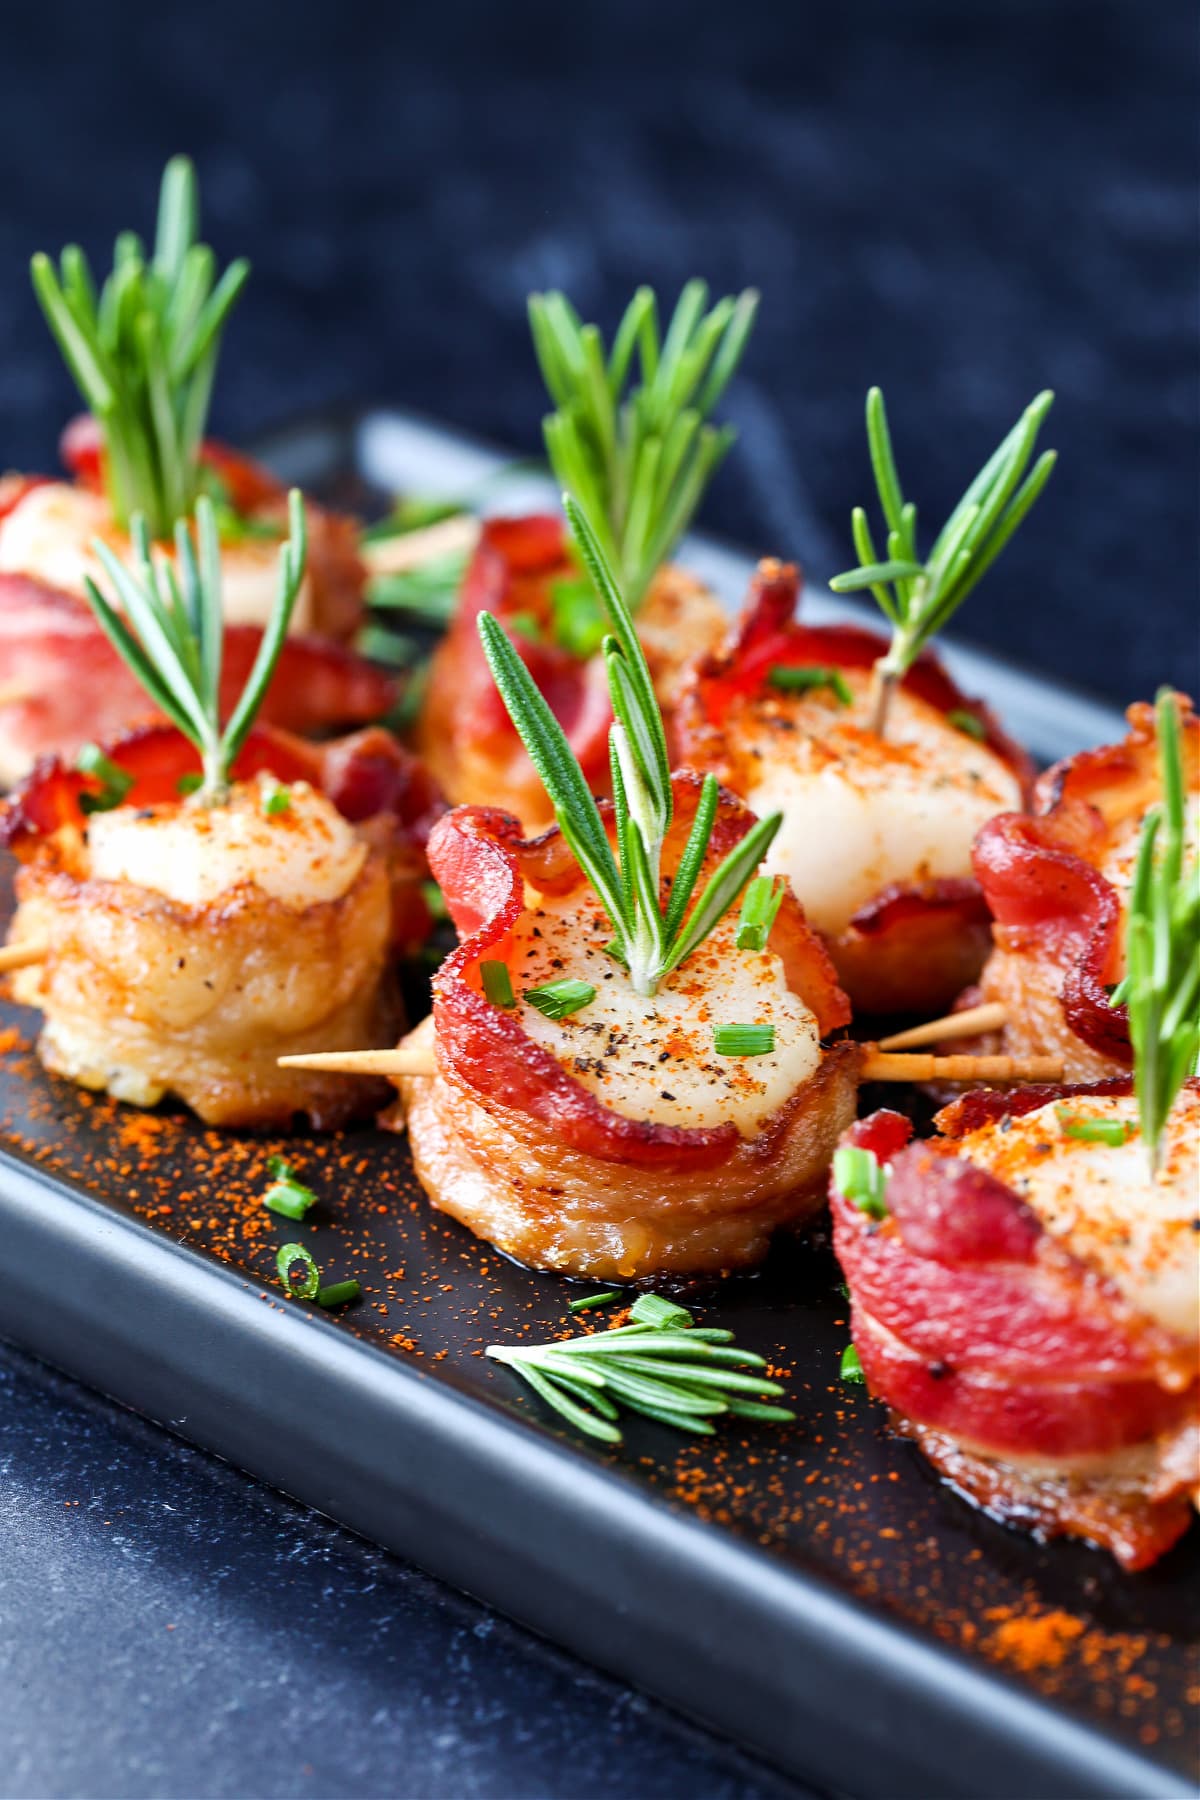 scallops wrapped in bacon on platter garnished with rosemary